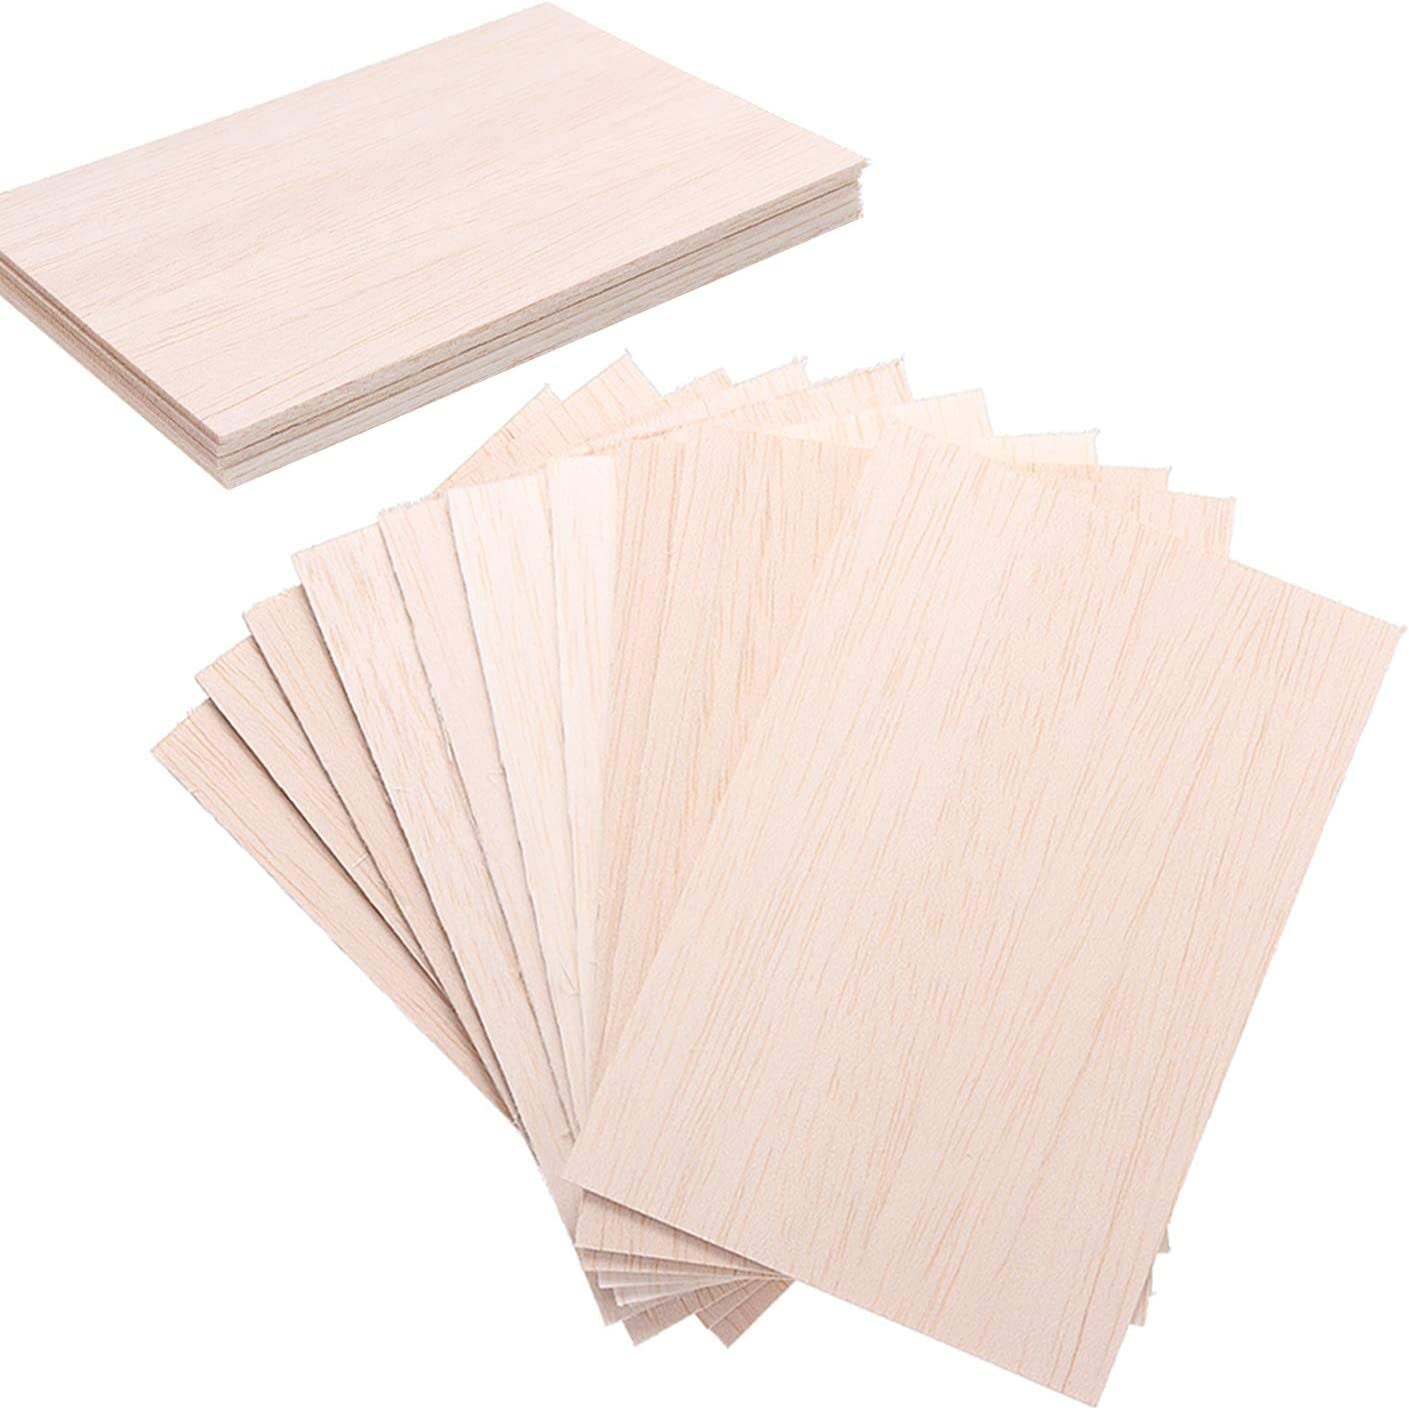 Bulk Wood Cutting Boards With Handle Supplies Unfinished for Laser  Engraving Gifts. 